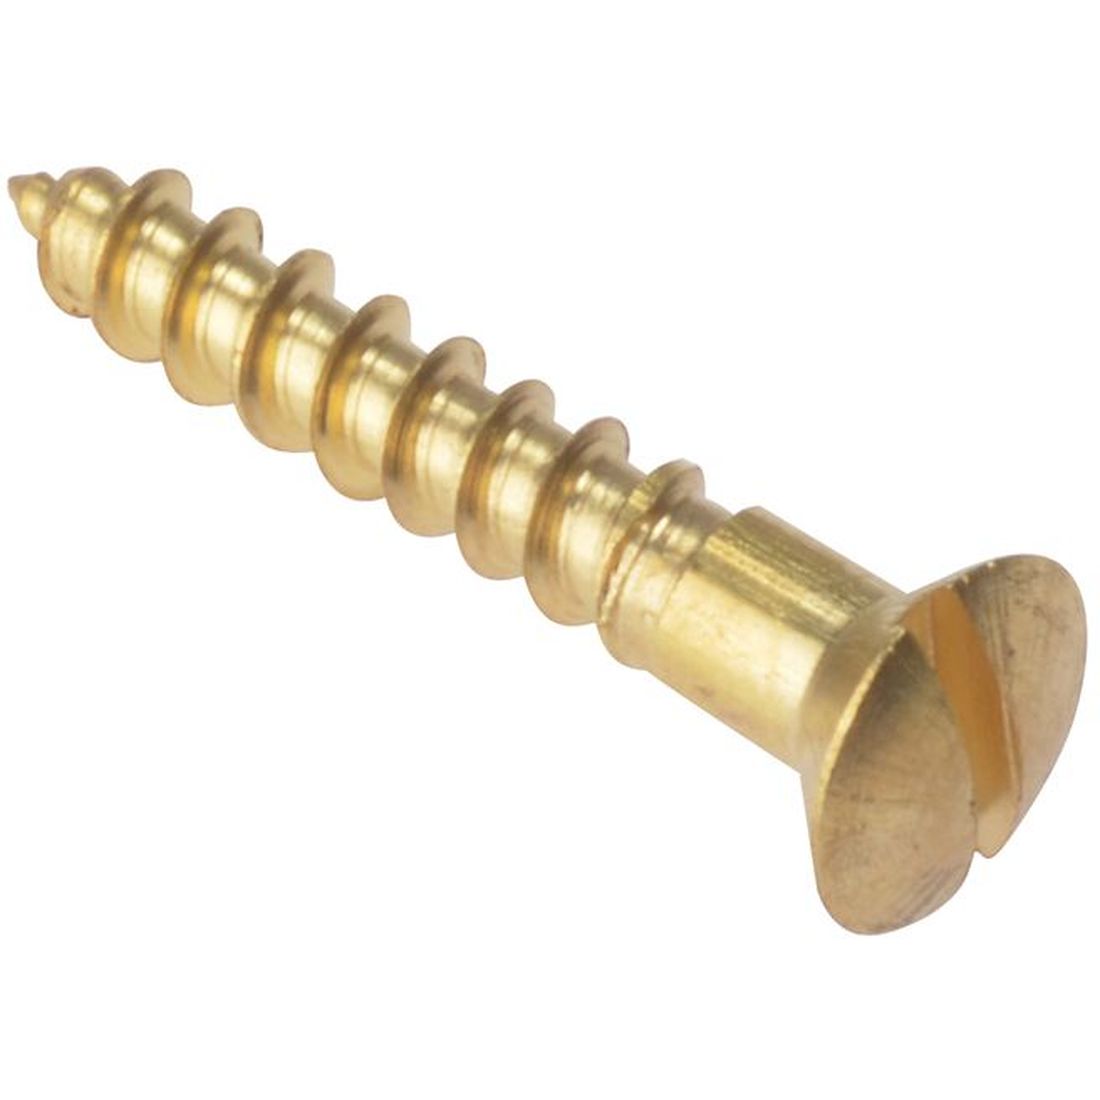 ForgeFix Wood Screw Slotted Raised Head ST Solid Brass 1in x 8 Box 200                   